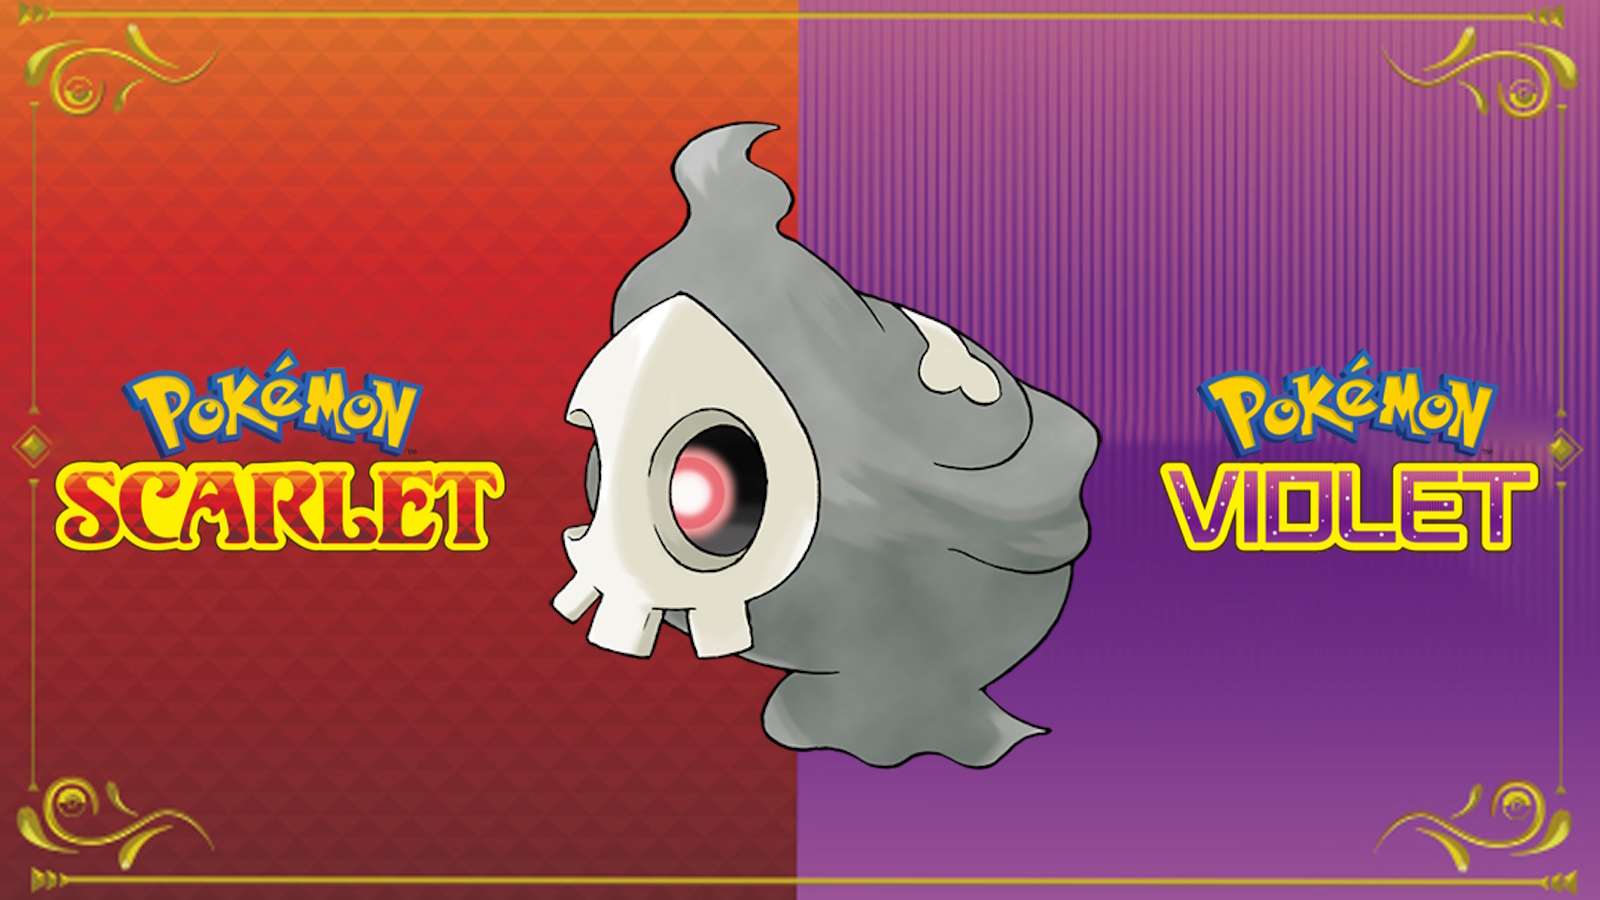 Duskull the Requiem Pokemon with Scarlet and Violet's logos.